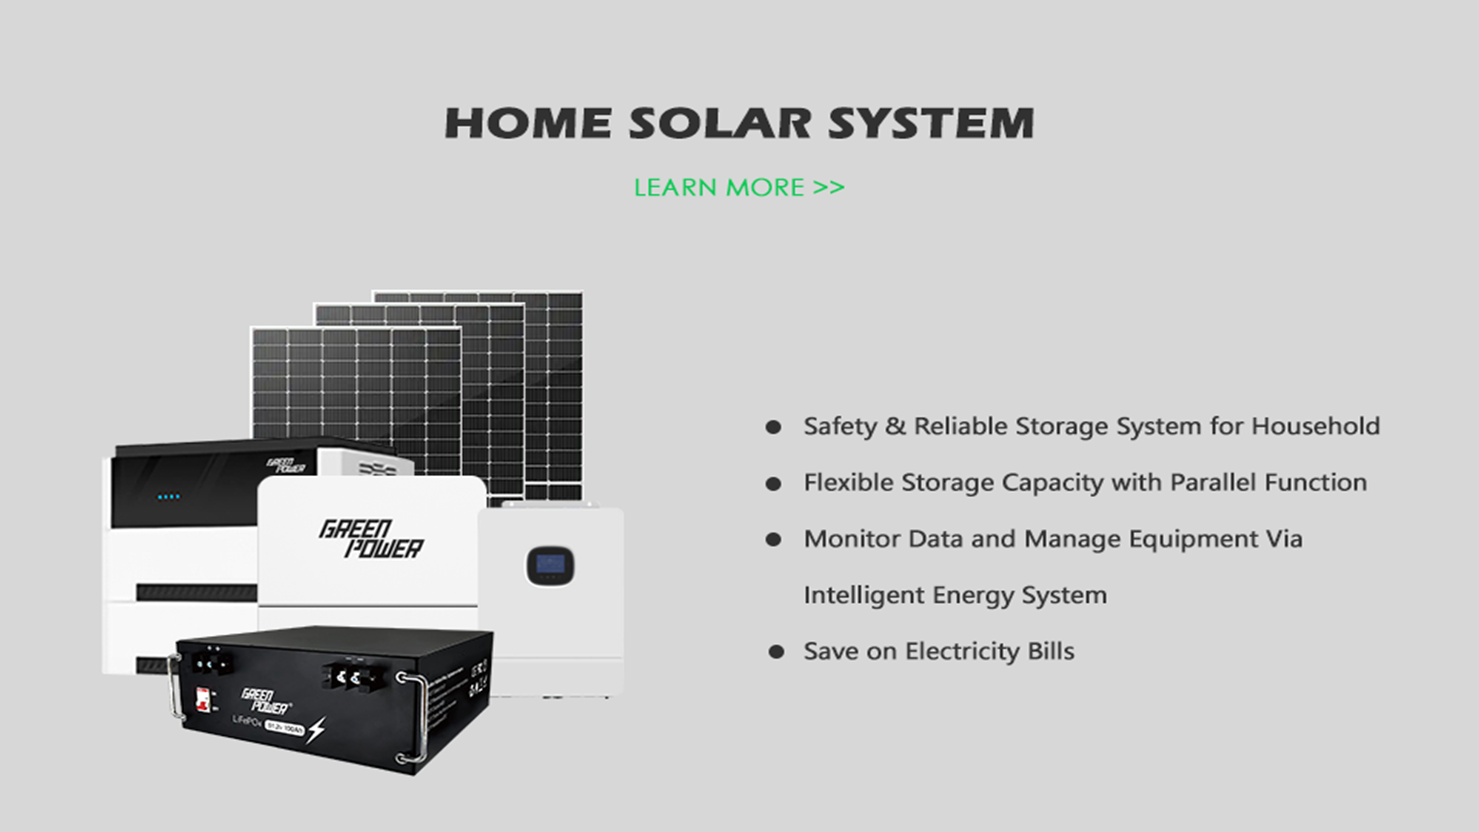 Home Photovoltaic Power System with Backup2